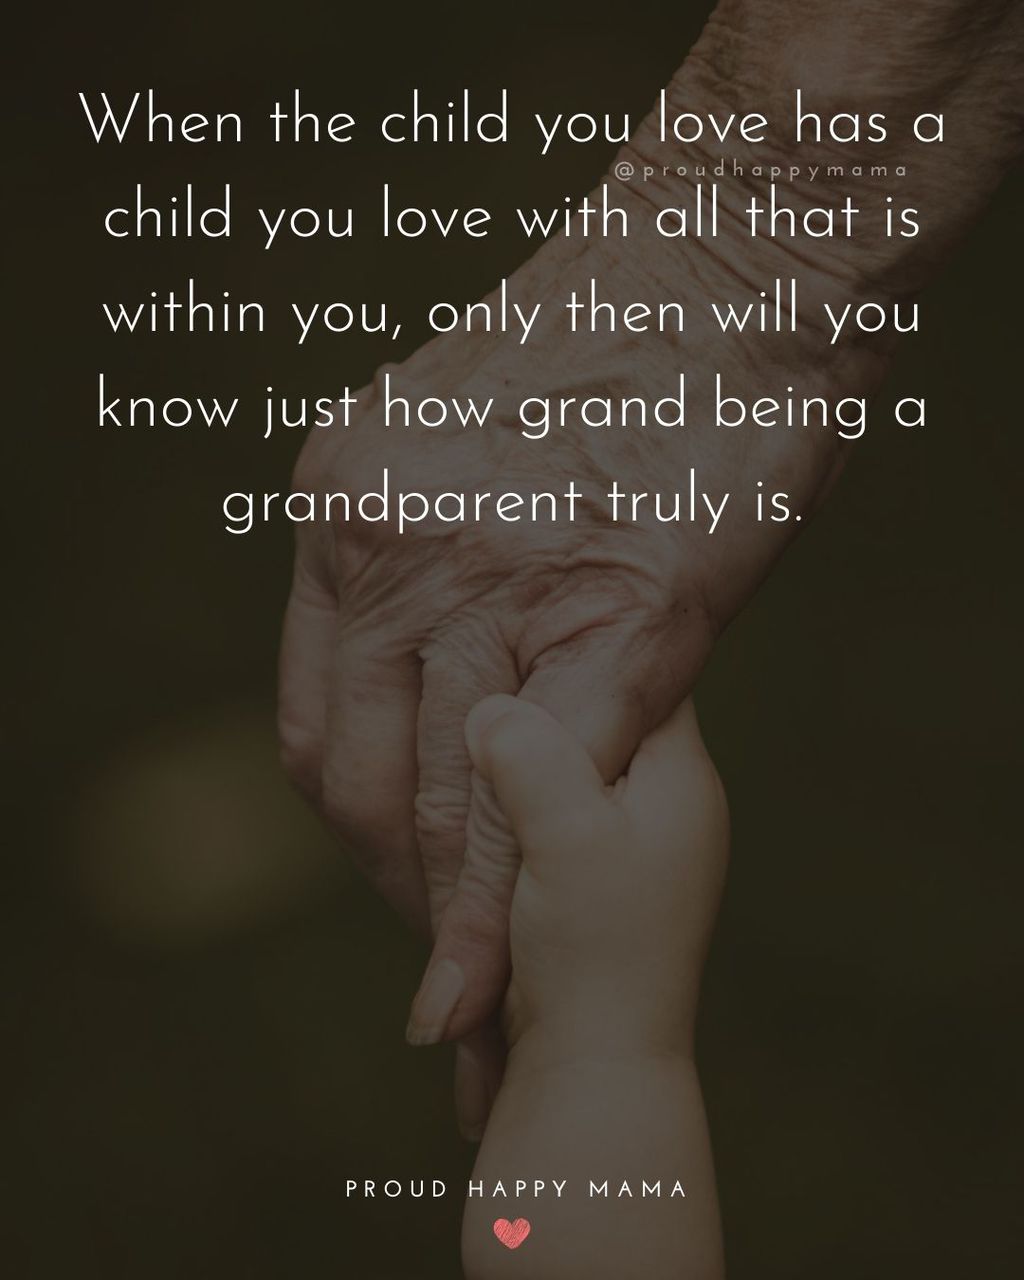 Quotes About Grandkids | When the child you love has a child you love with all that is within you, only then will you know just how grand being a grandparent truly is.